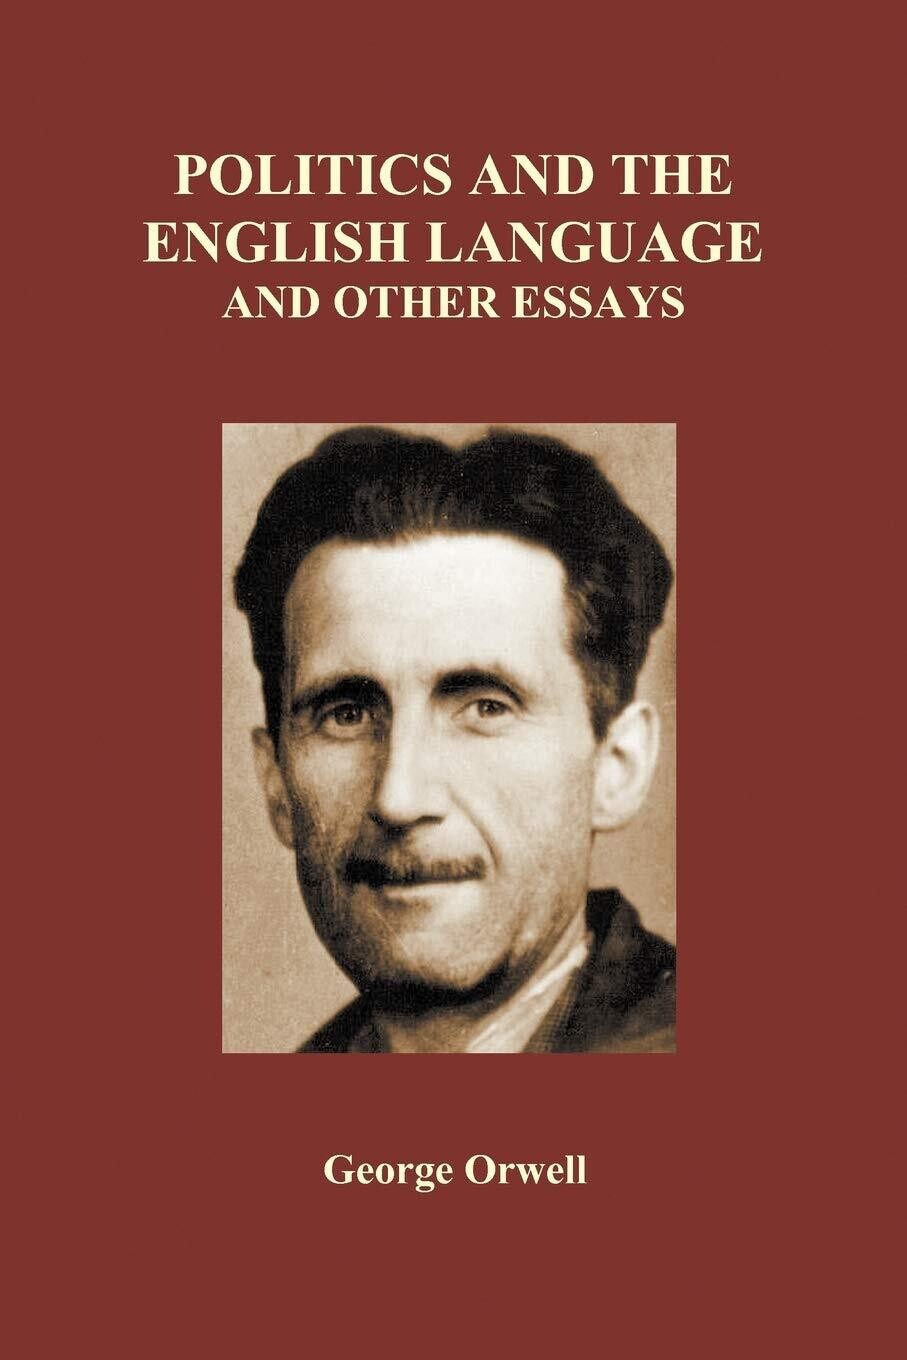 politics-and-the-english-language-by-george-orwell